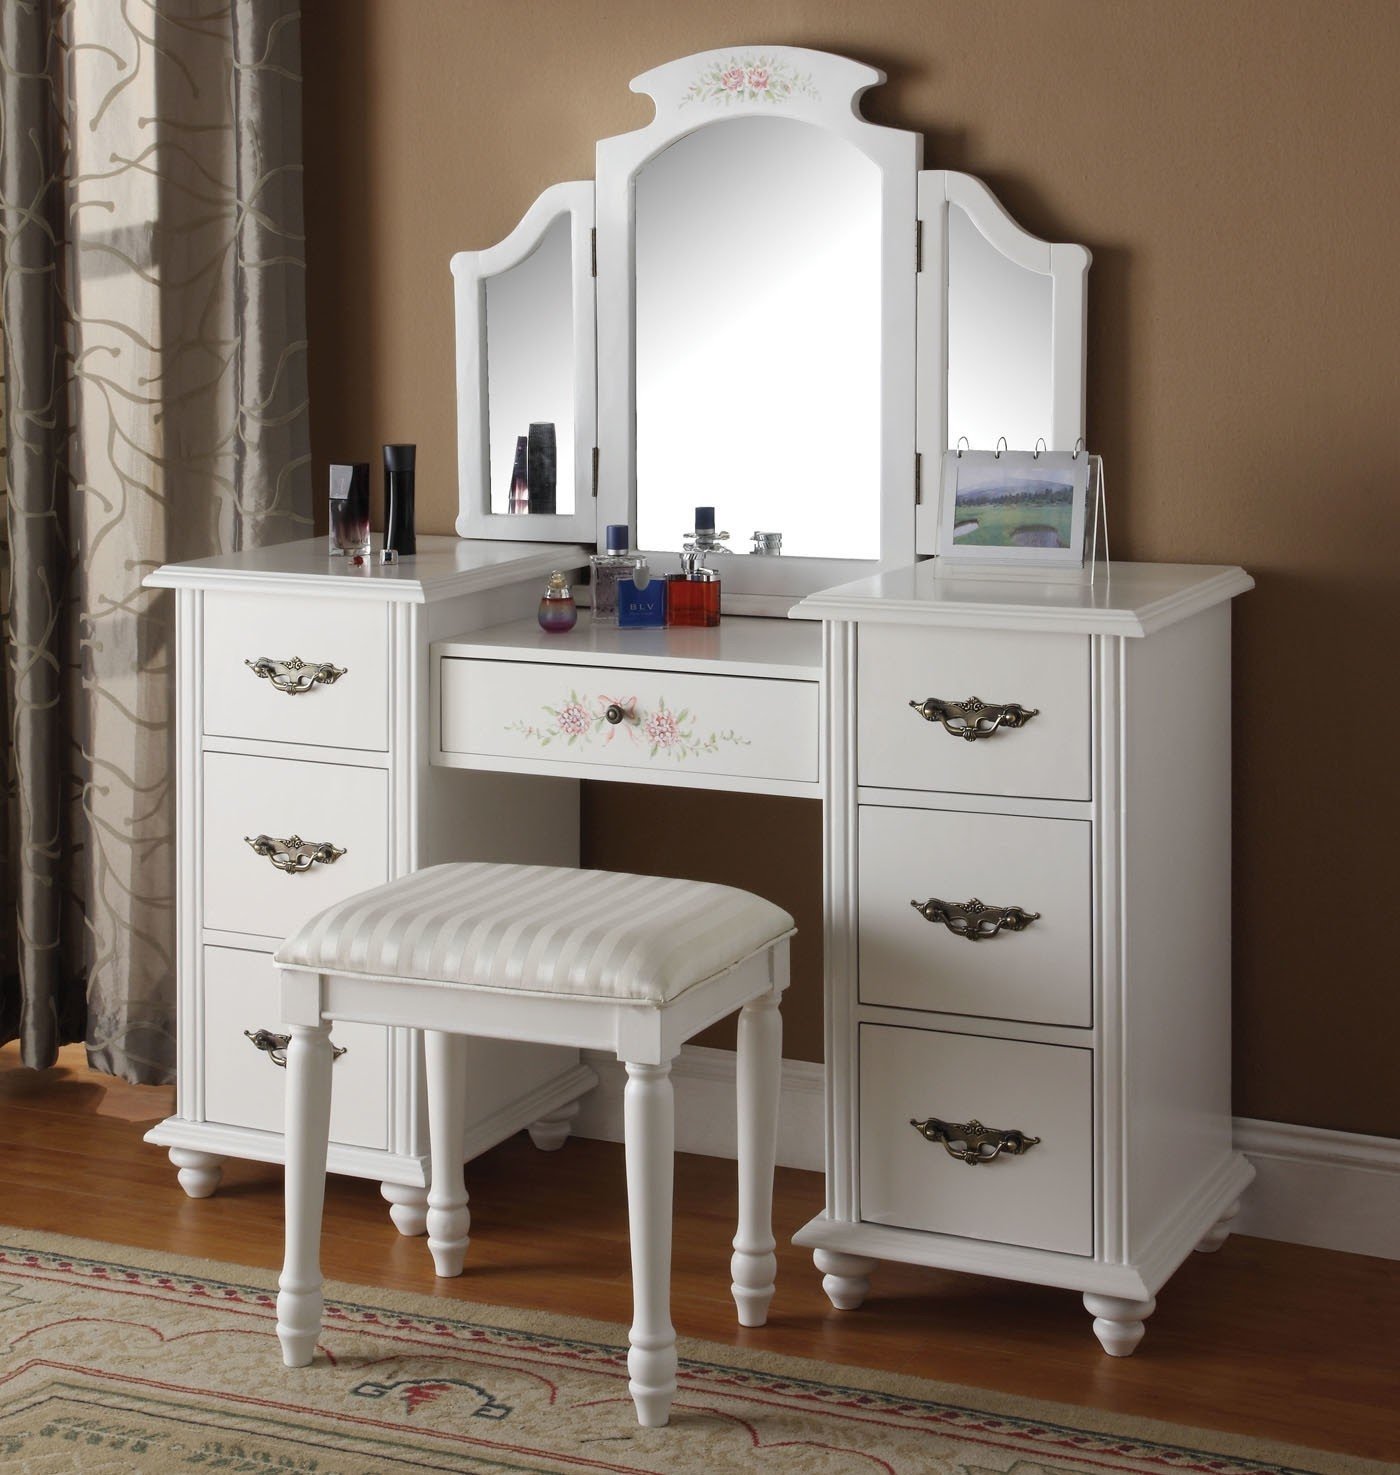 Makeup Vanity Table With Lighted Mirror, Vanity Desk With Drawers And Lighted Mirror